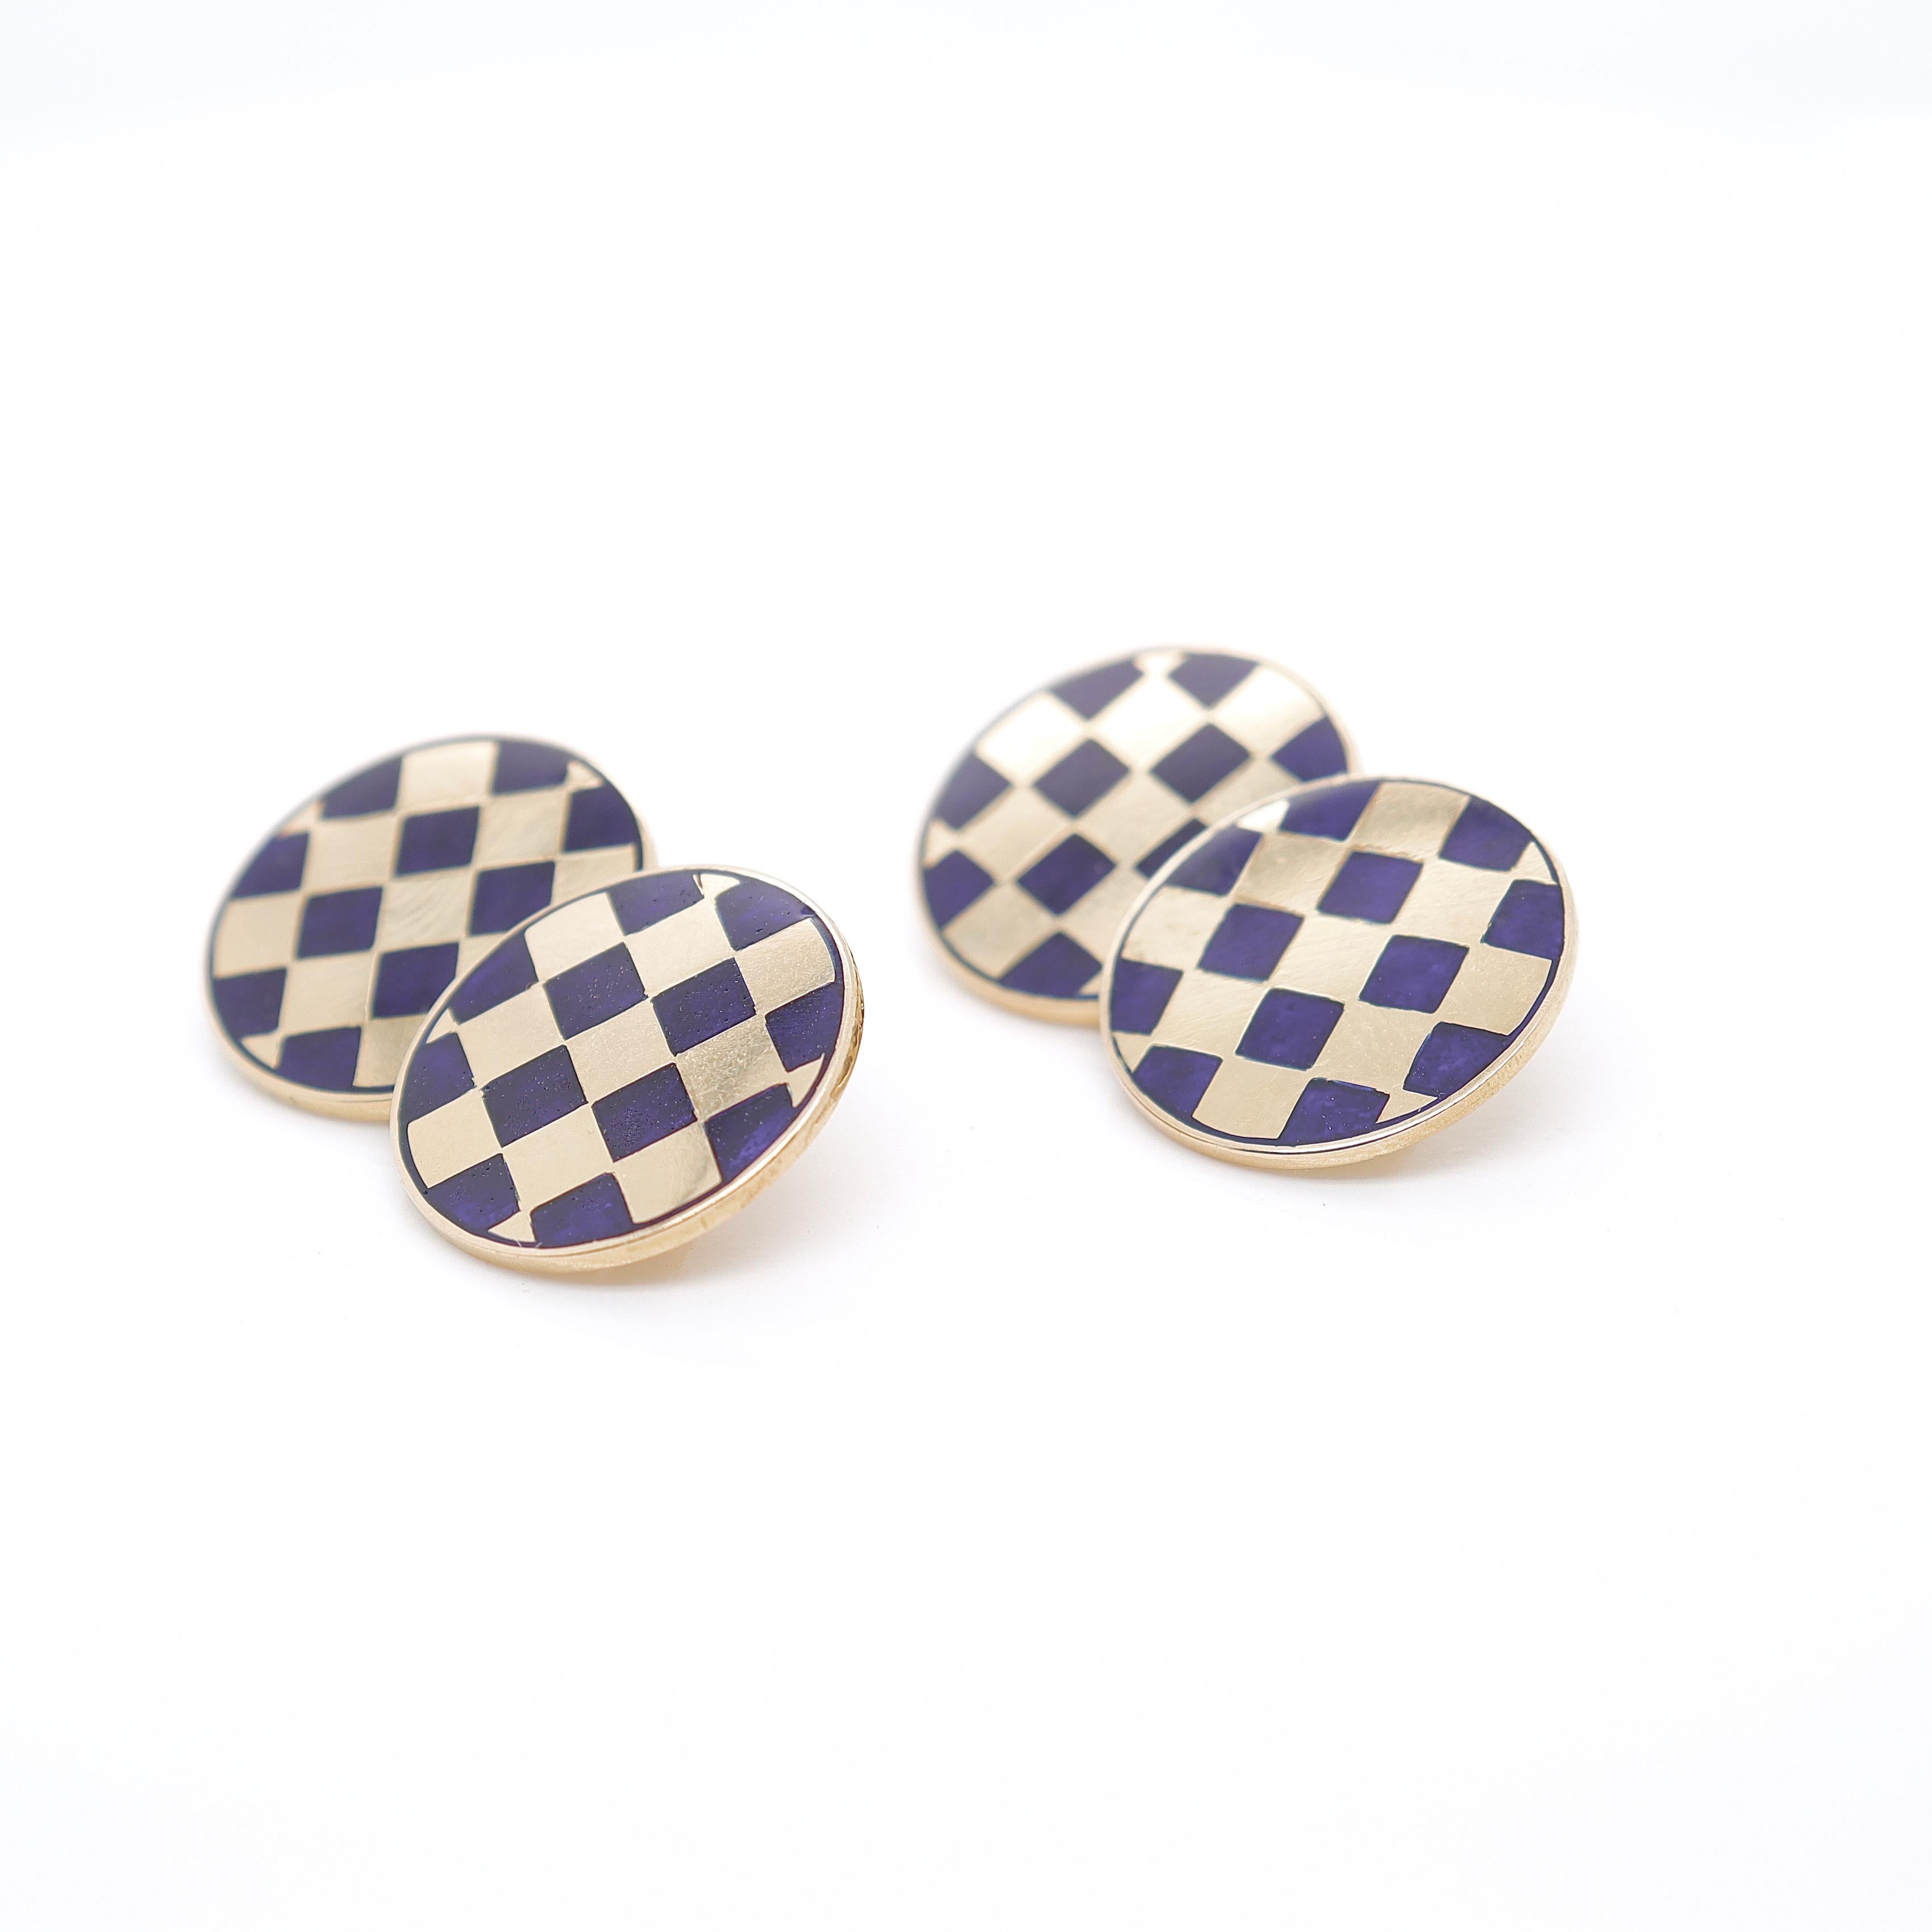 Pair of Vintage 14K Yellow Gold & Blue Enamel Checkerboard Cufflinks For Sale 2